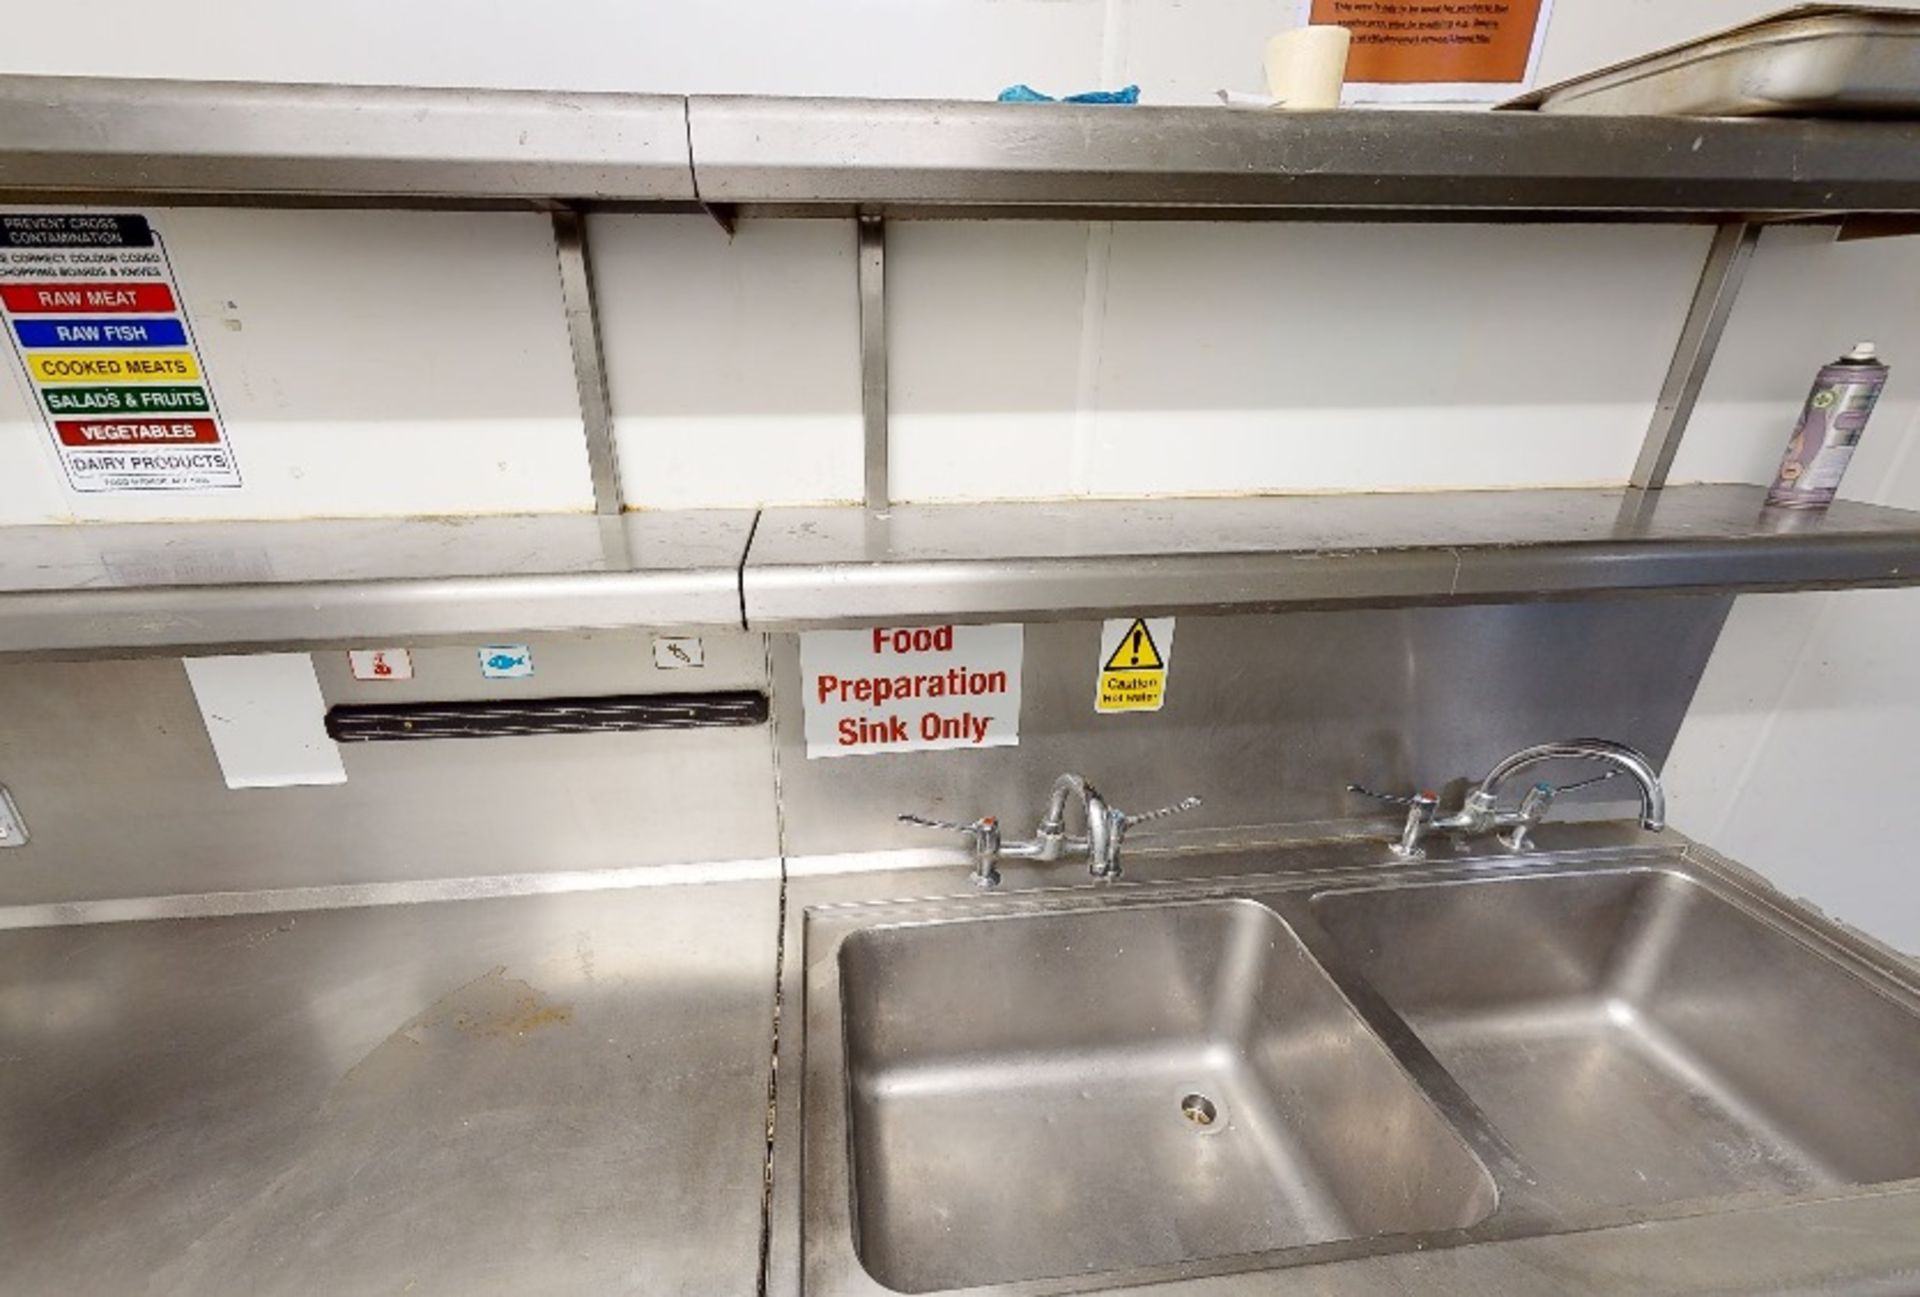 1 x Stainless Steel Commercial Wash Stand With Twin Sink Basins, Mixer Taps, Overhead Shelves, - Image 9 of 10